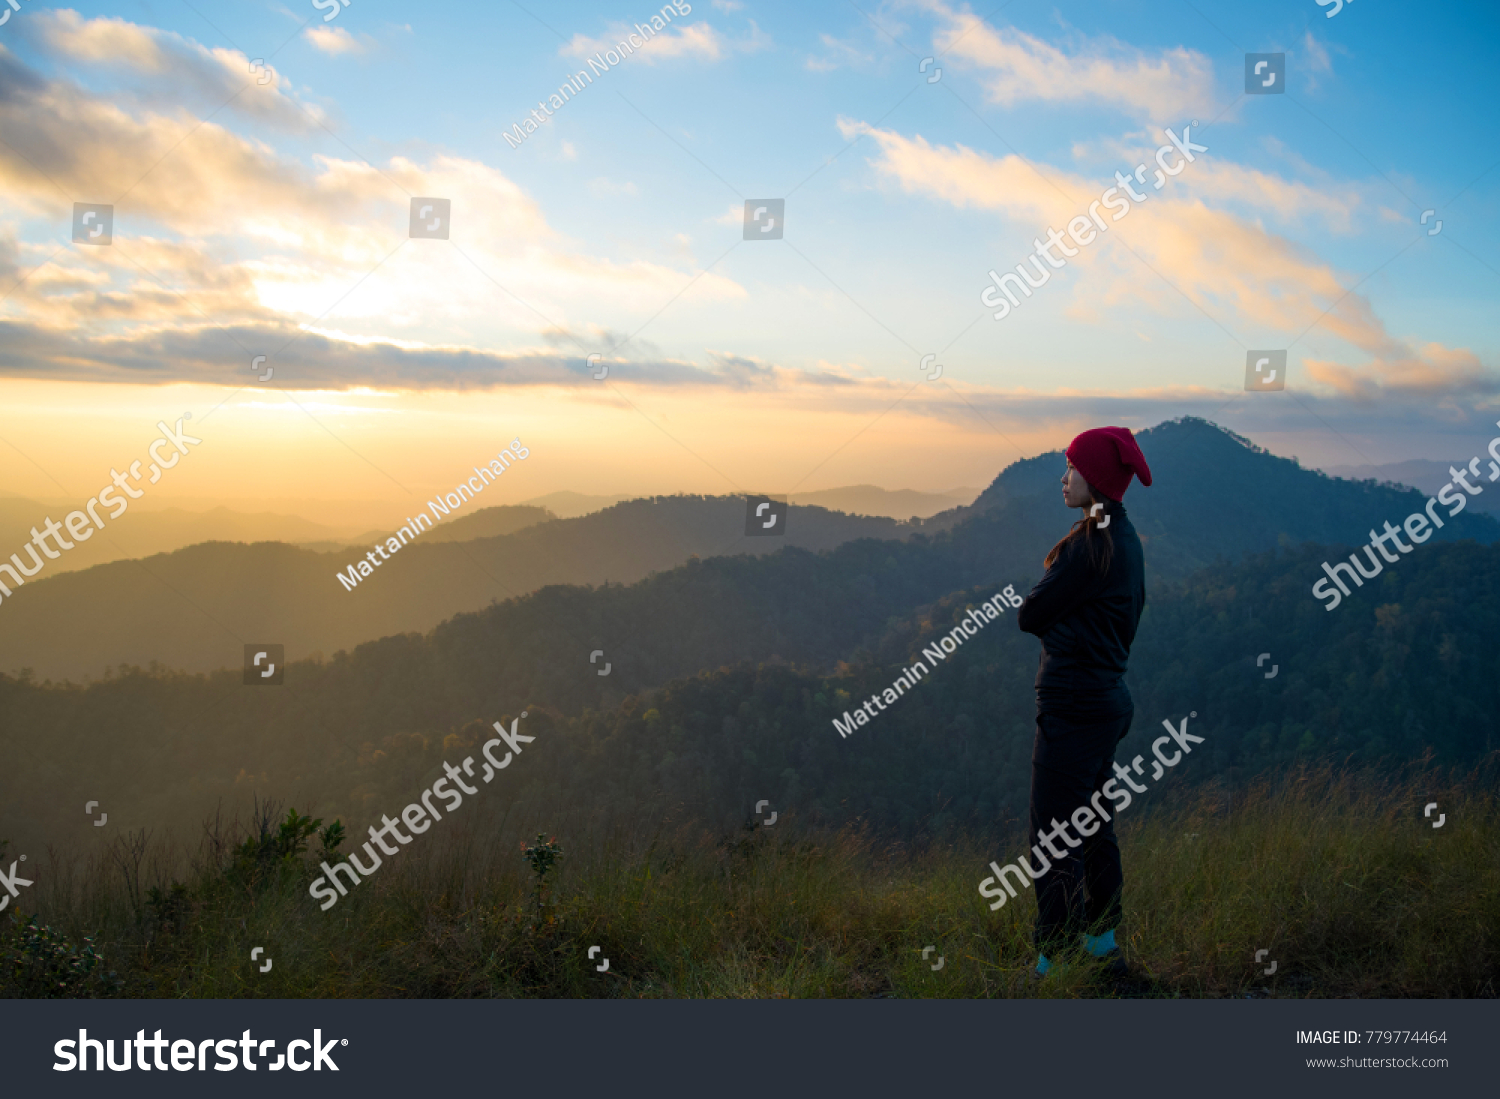 Woman tourism hiking vacation and travel. Tourist woman in camping site standing and enjoying mountains landscape view of sunset, sunrise at winter mountain in Chiangmai, Thailand. #779774464